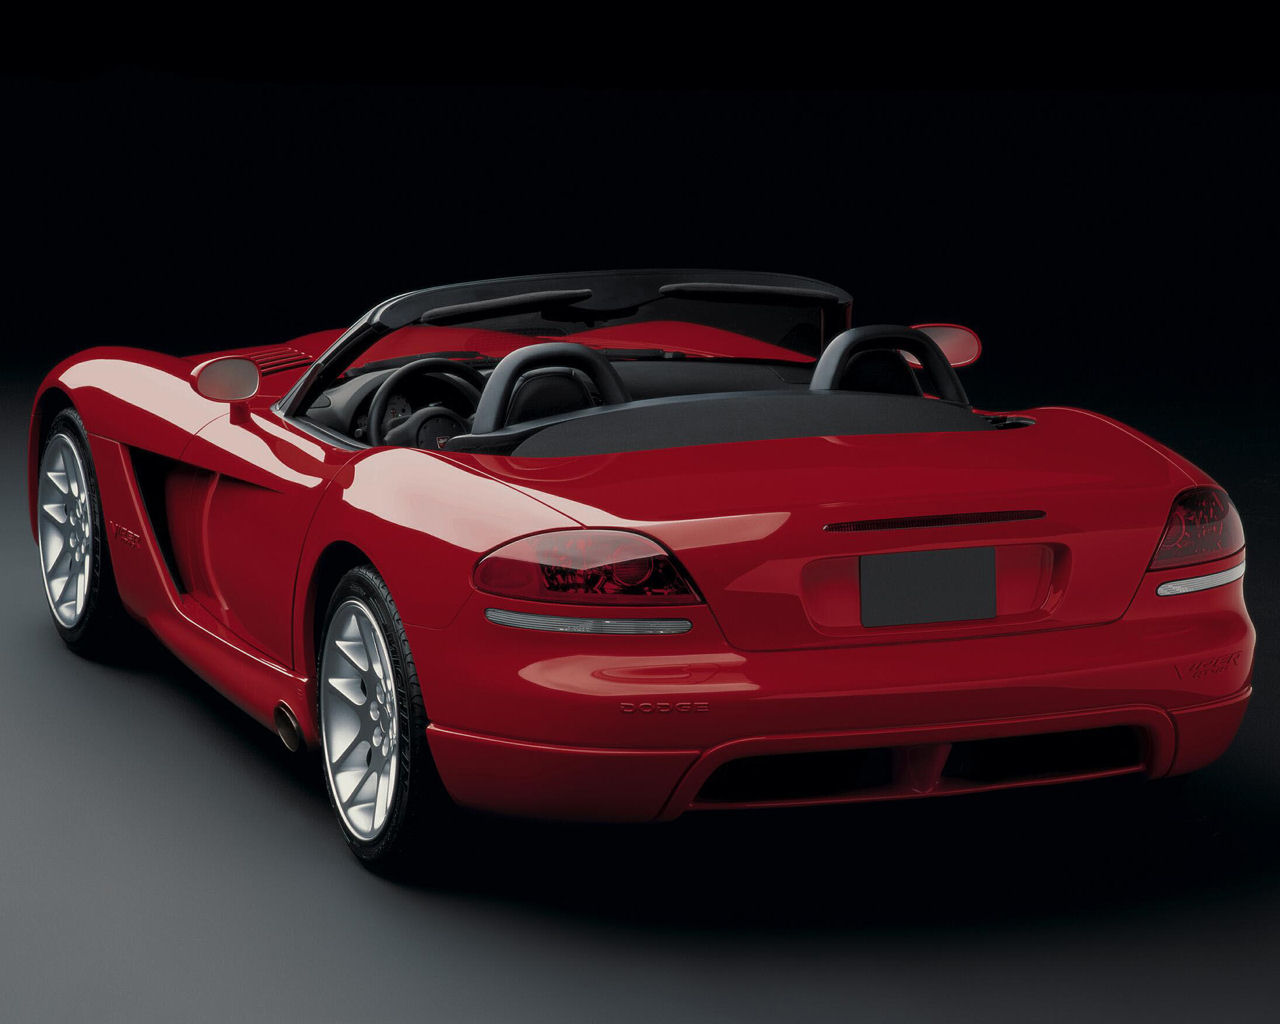 Please Right Click On The Dodge Viper Wallpaper Below And Choose